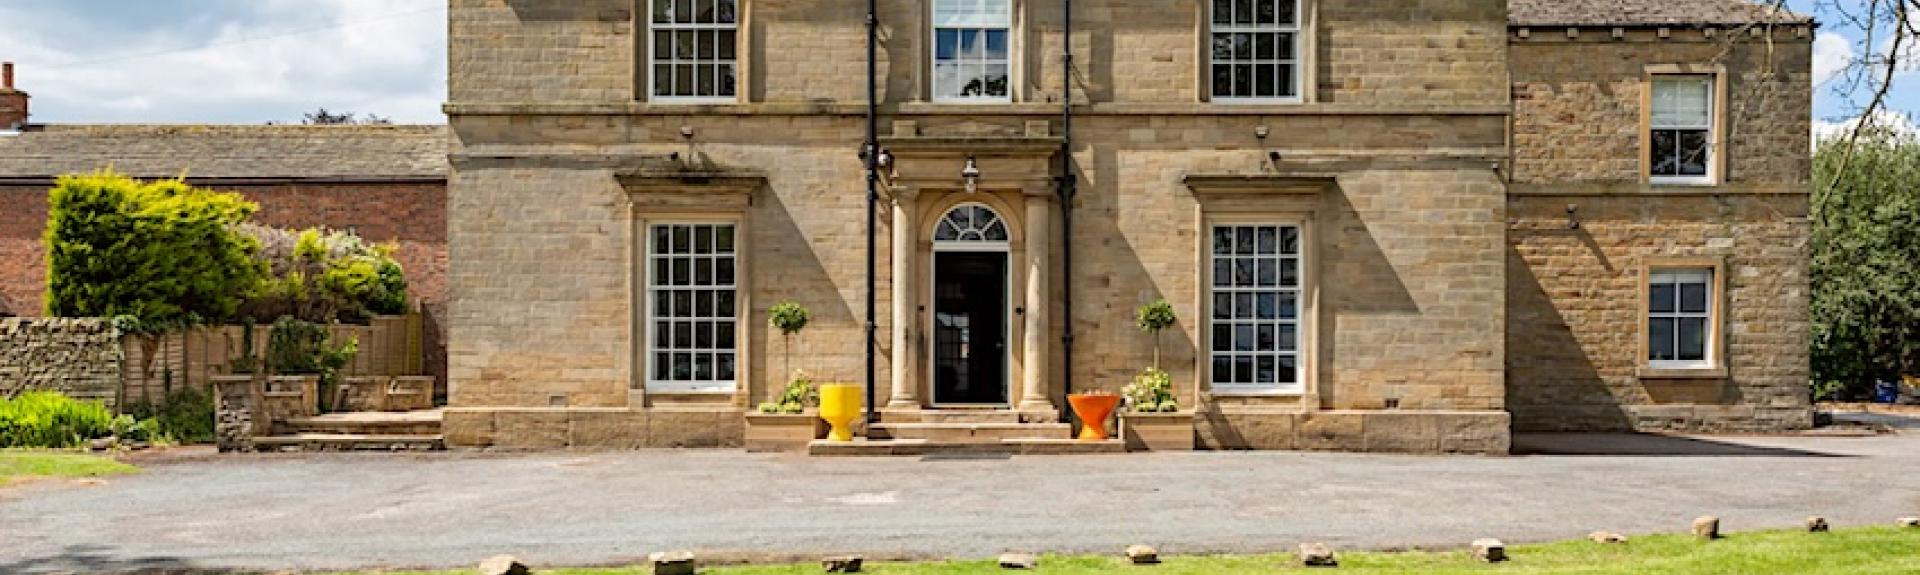 2-storey, stone-built, Georgian country house overlooking spacious lawns.